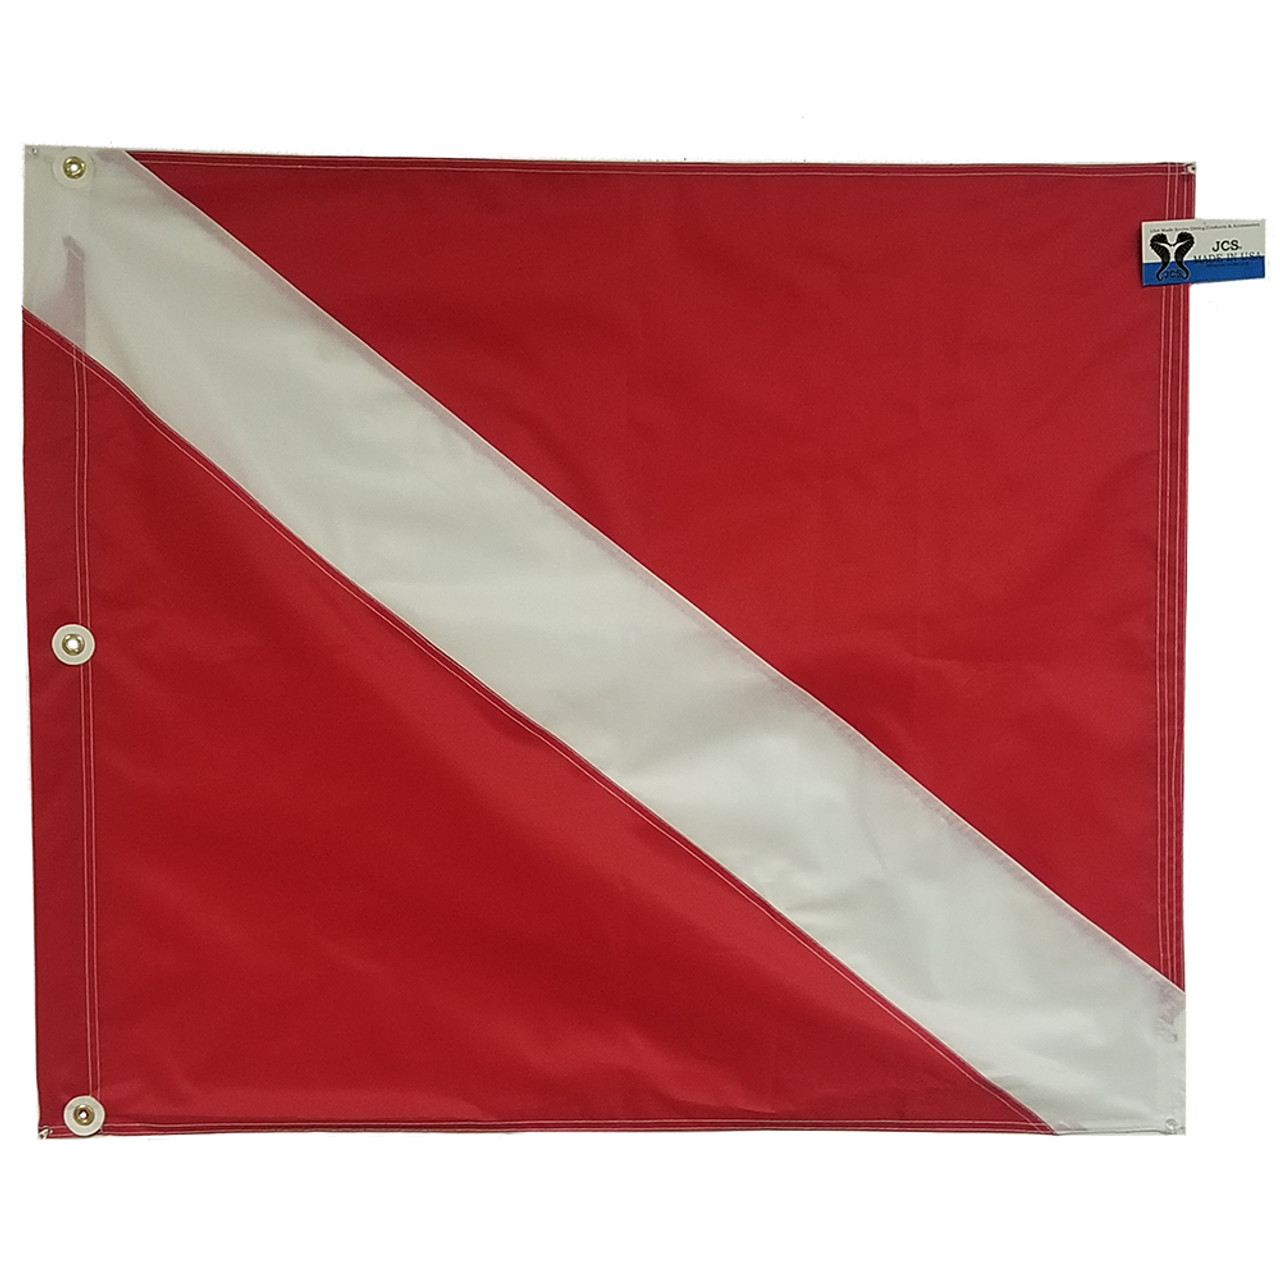 Boat Flag with Steel Spring Wire Stiffener, 31x36